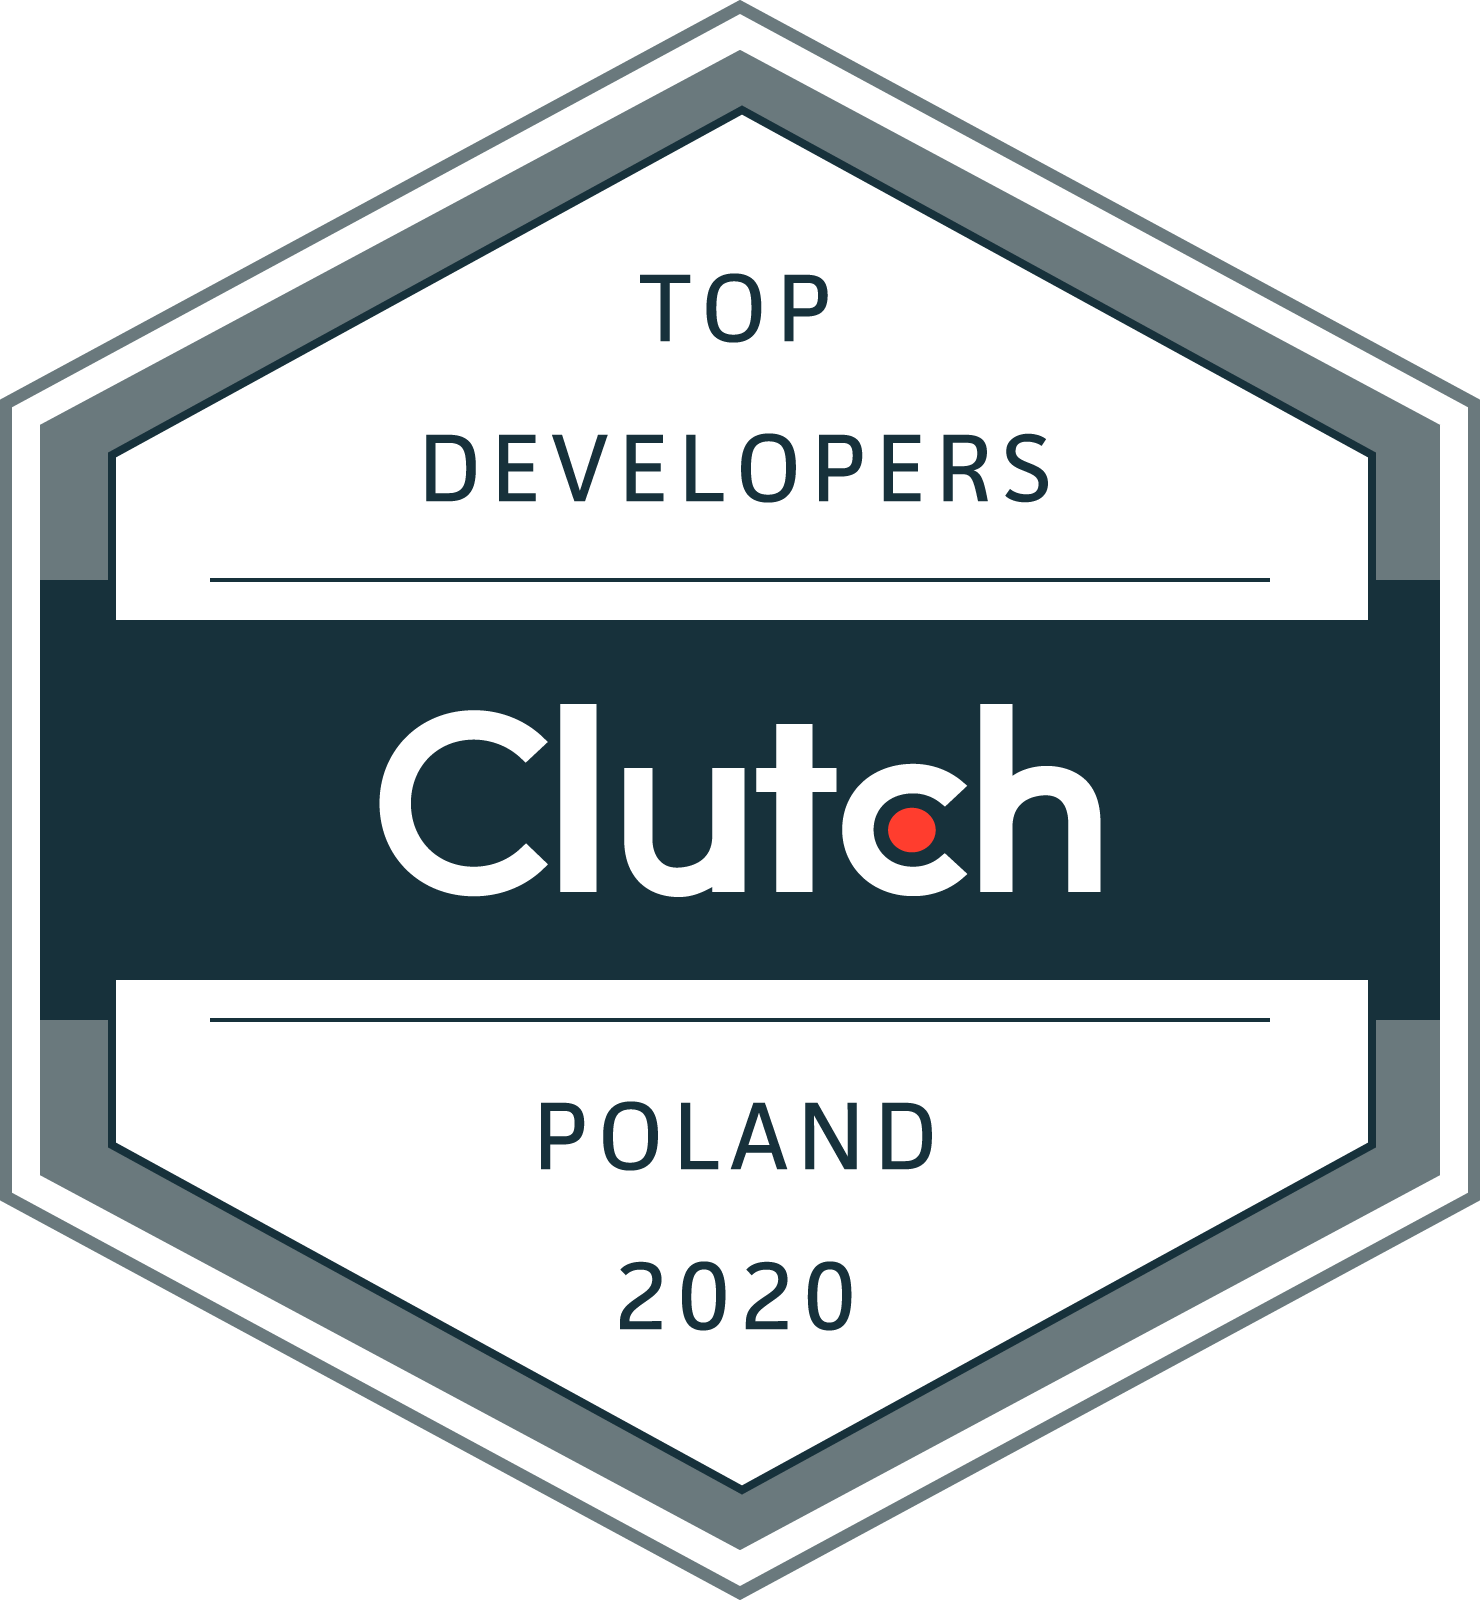 Top Developers Poland Clutch 